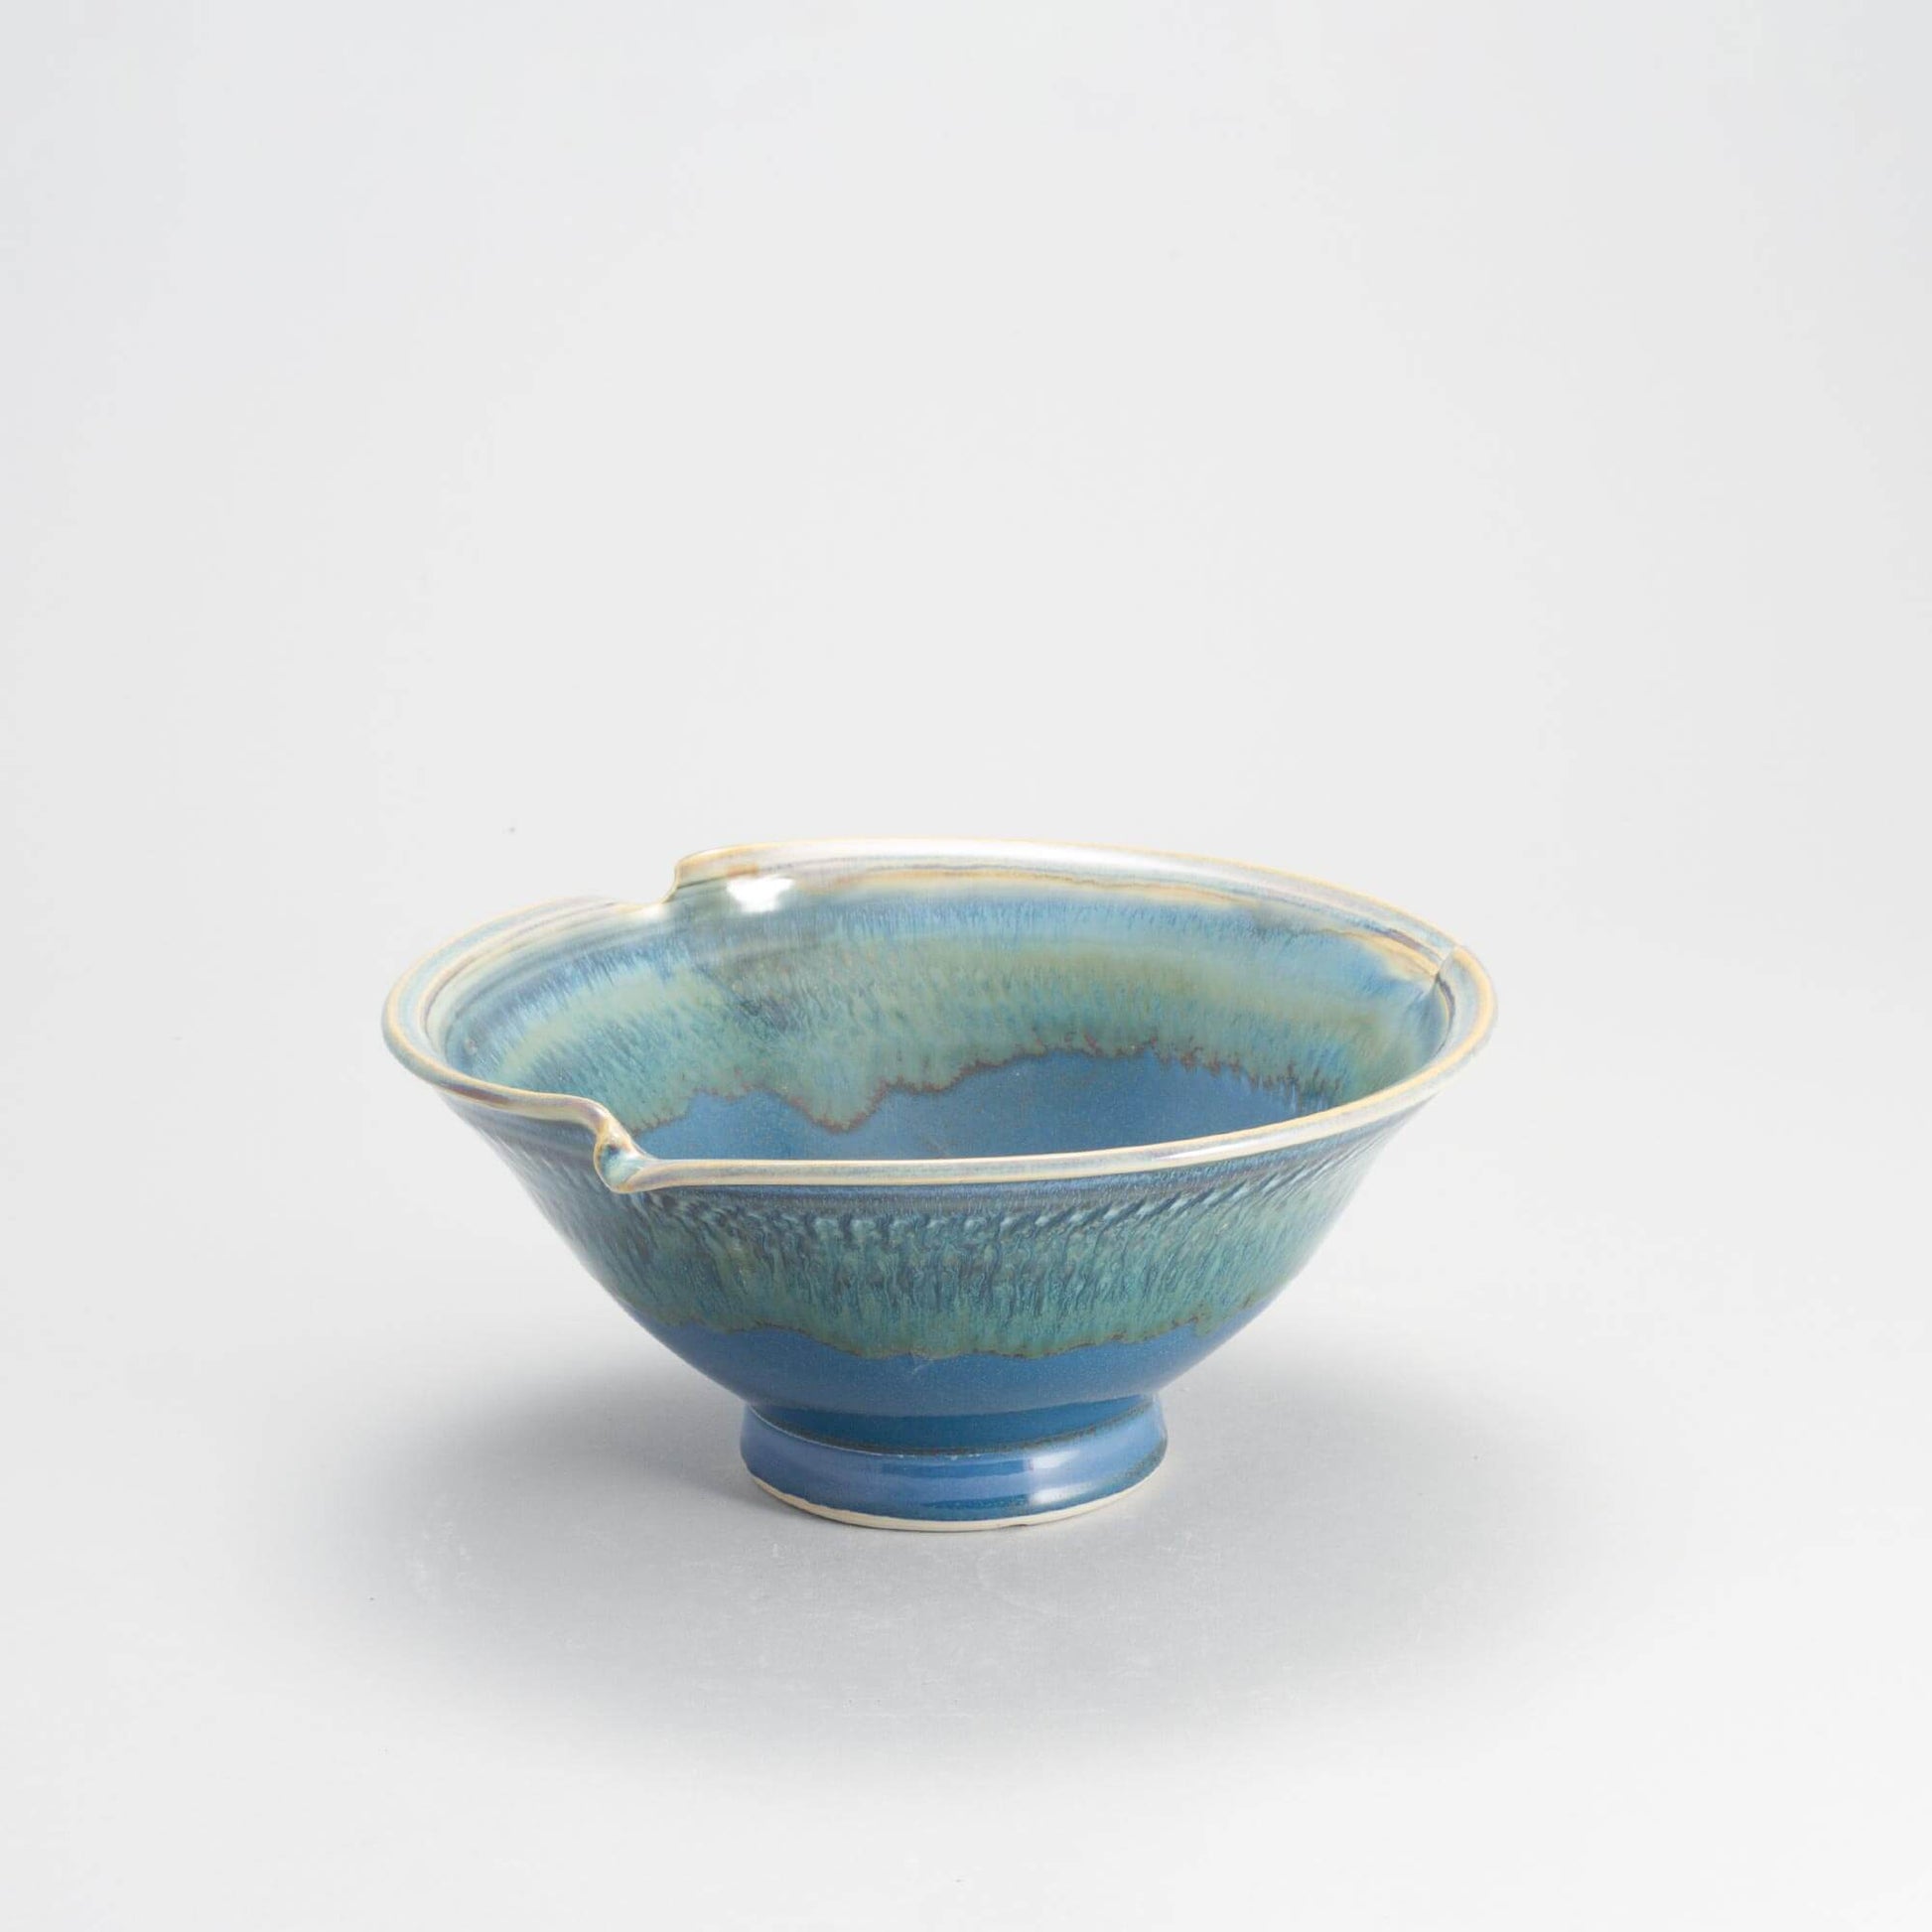 Handmade Pottery Signature Wave Bowl in Blue Oribe pattern made by Georgetown Pottery in Maine